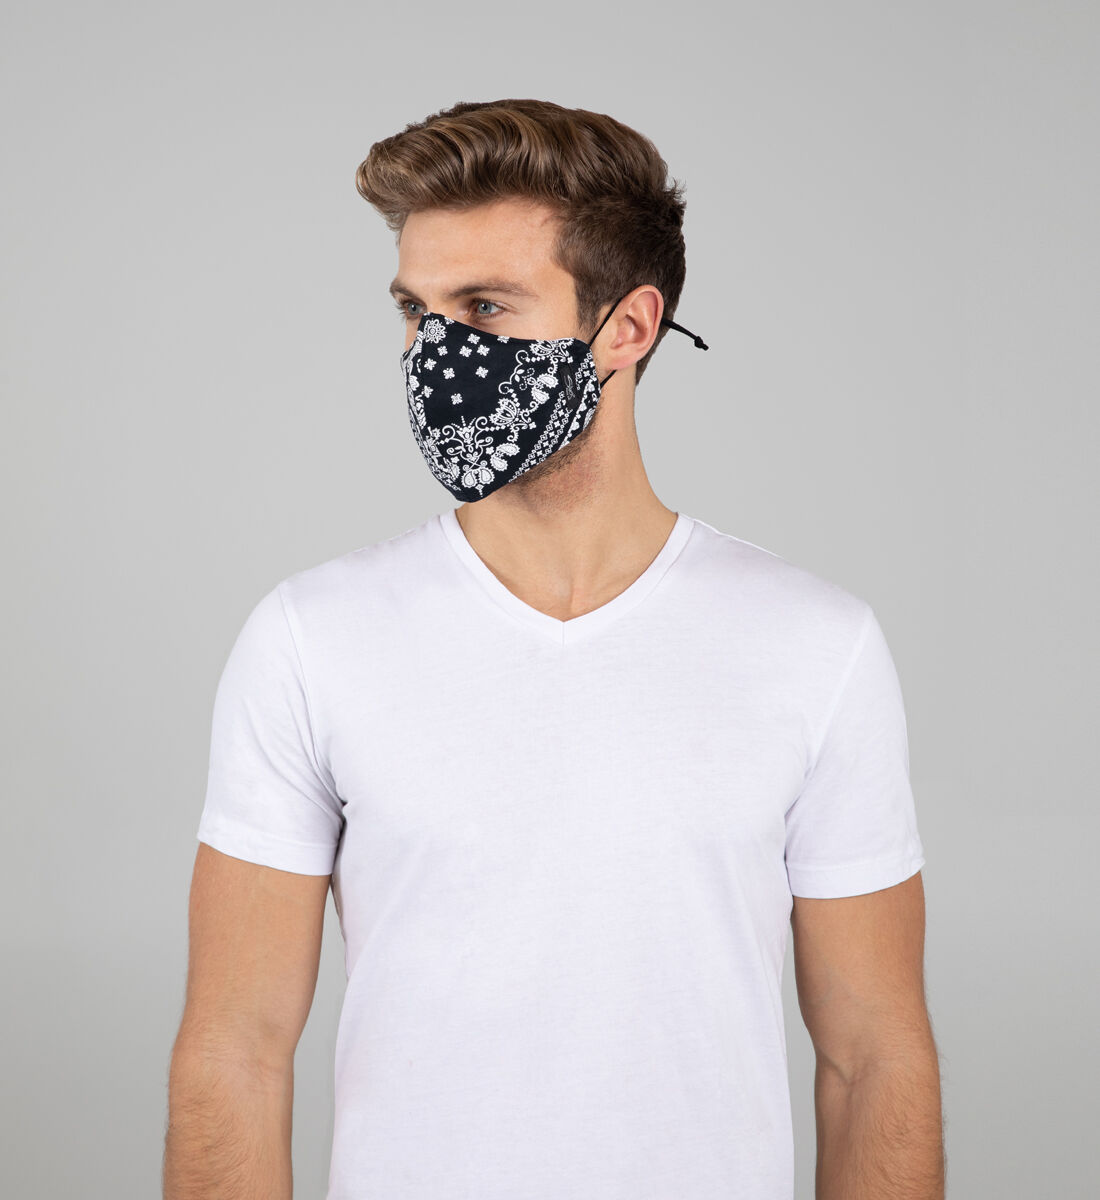 Printed Protective Face Mask - Set of 4 Back